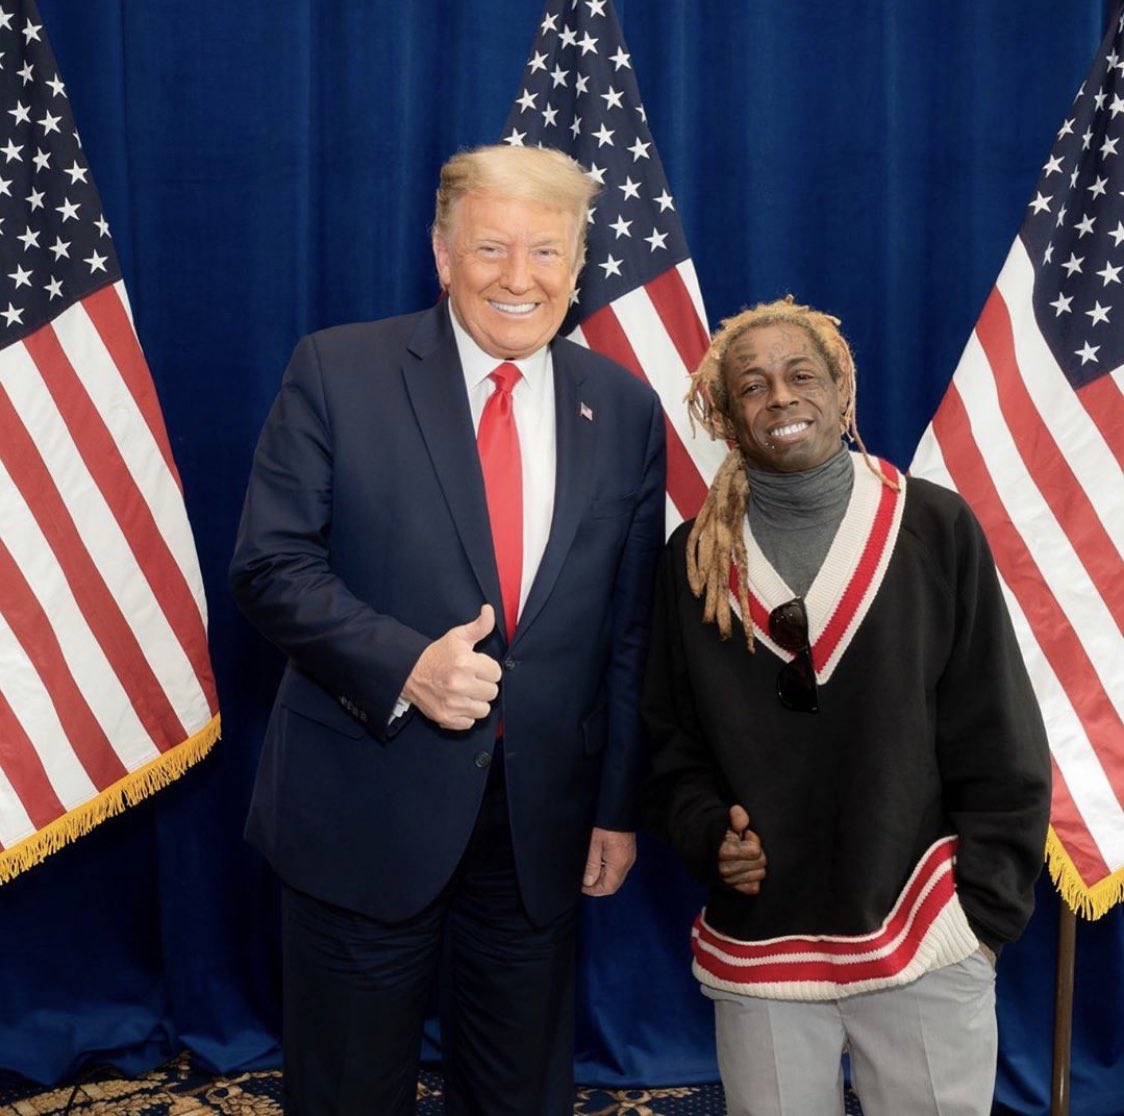 7) How desperate does  #Trump have to be to do a photo opp with a rapper 5 days before the election during a global pandemic on a day where nearly 90,000 people contracted the virus?  @jnthnwll